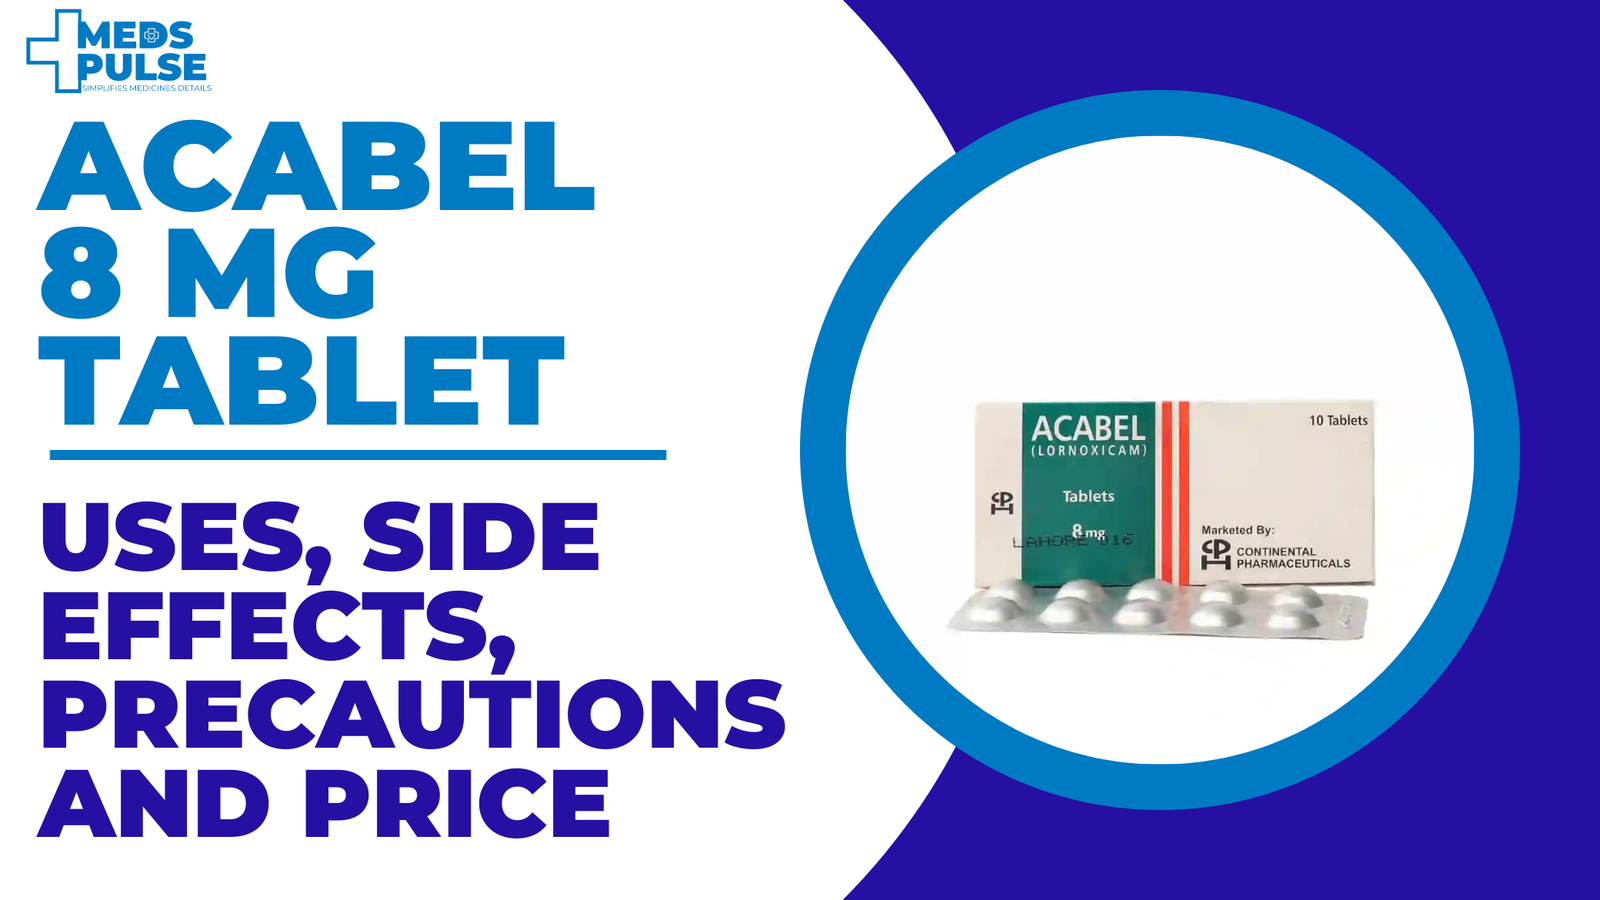 Acabel 8mg tablet: Uses, Side Effects, Precautions, and Price